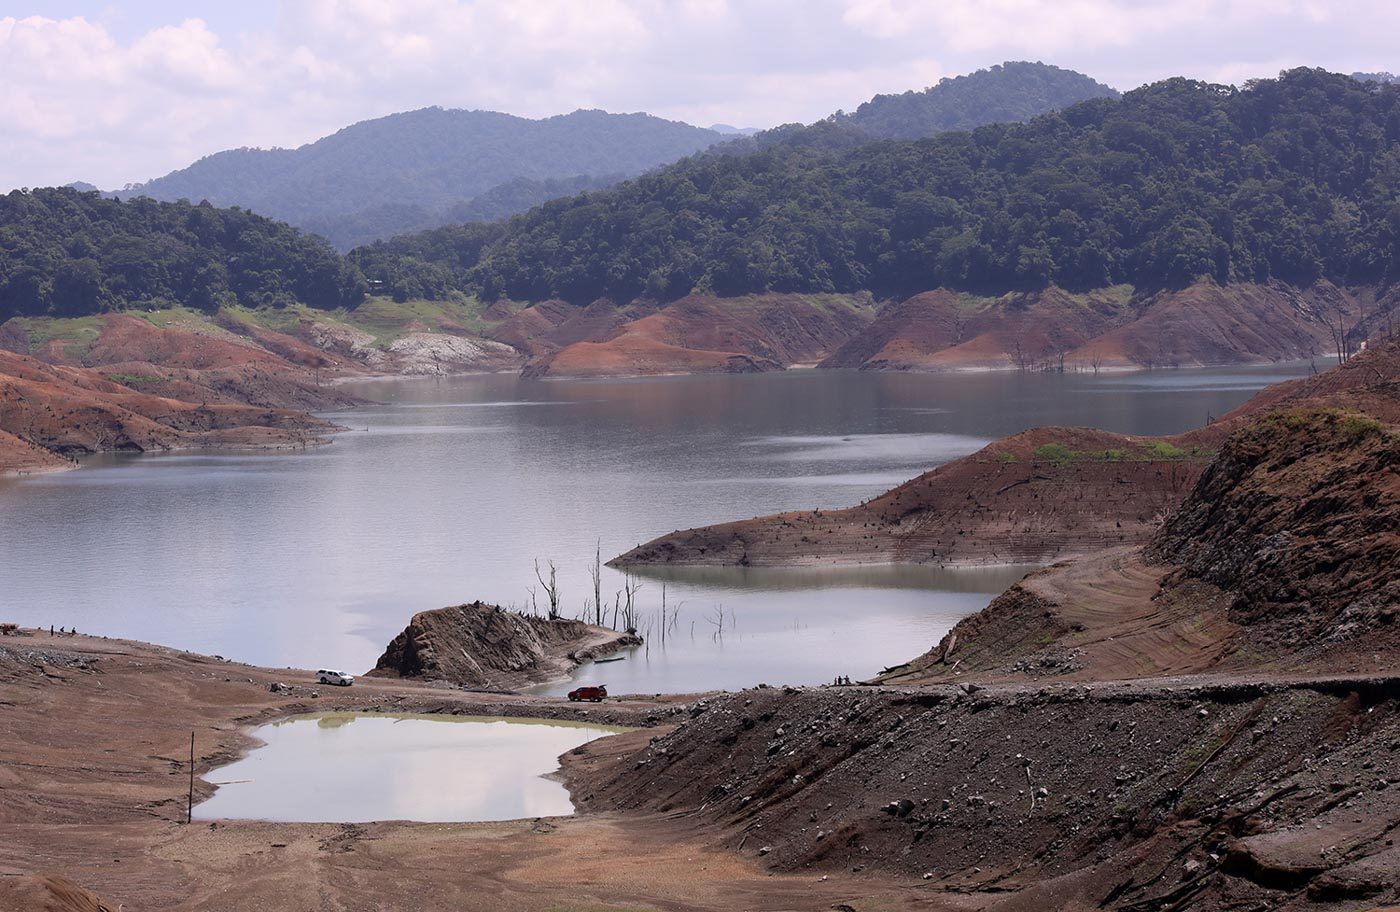 Yes, it’s raining, but not much over Angat Dam